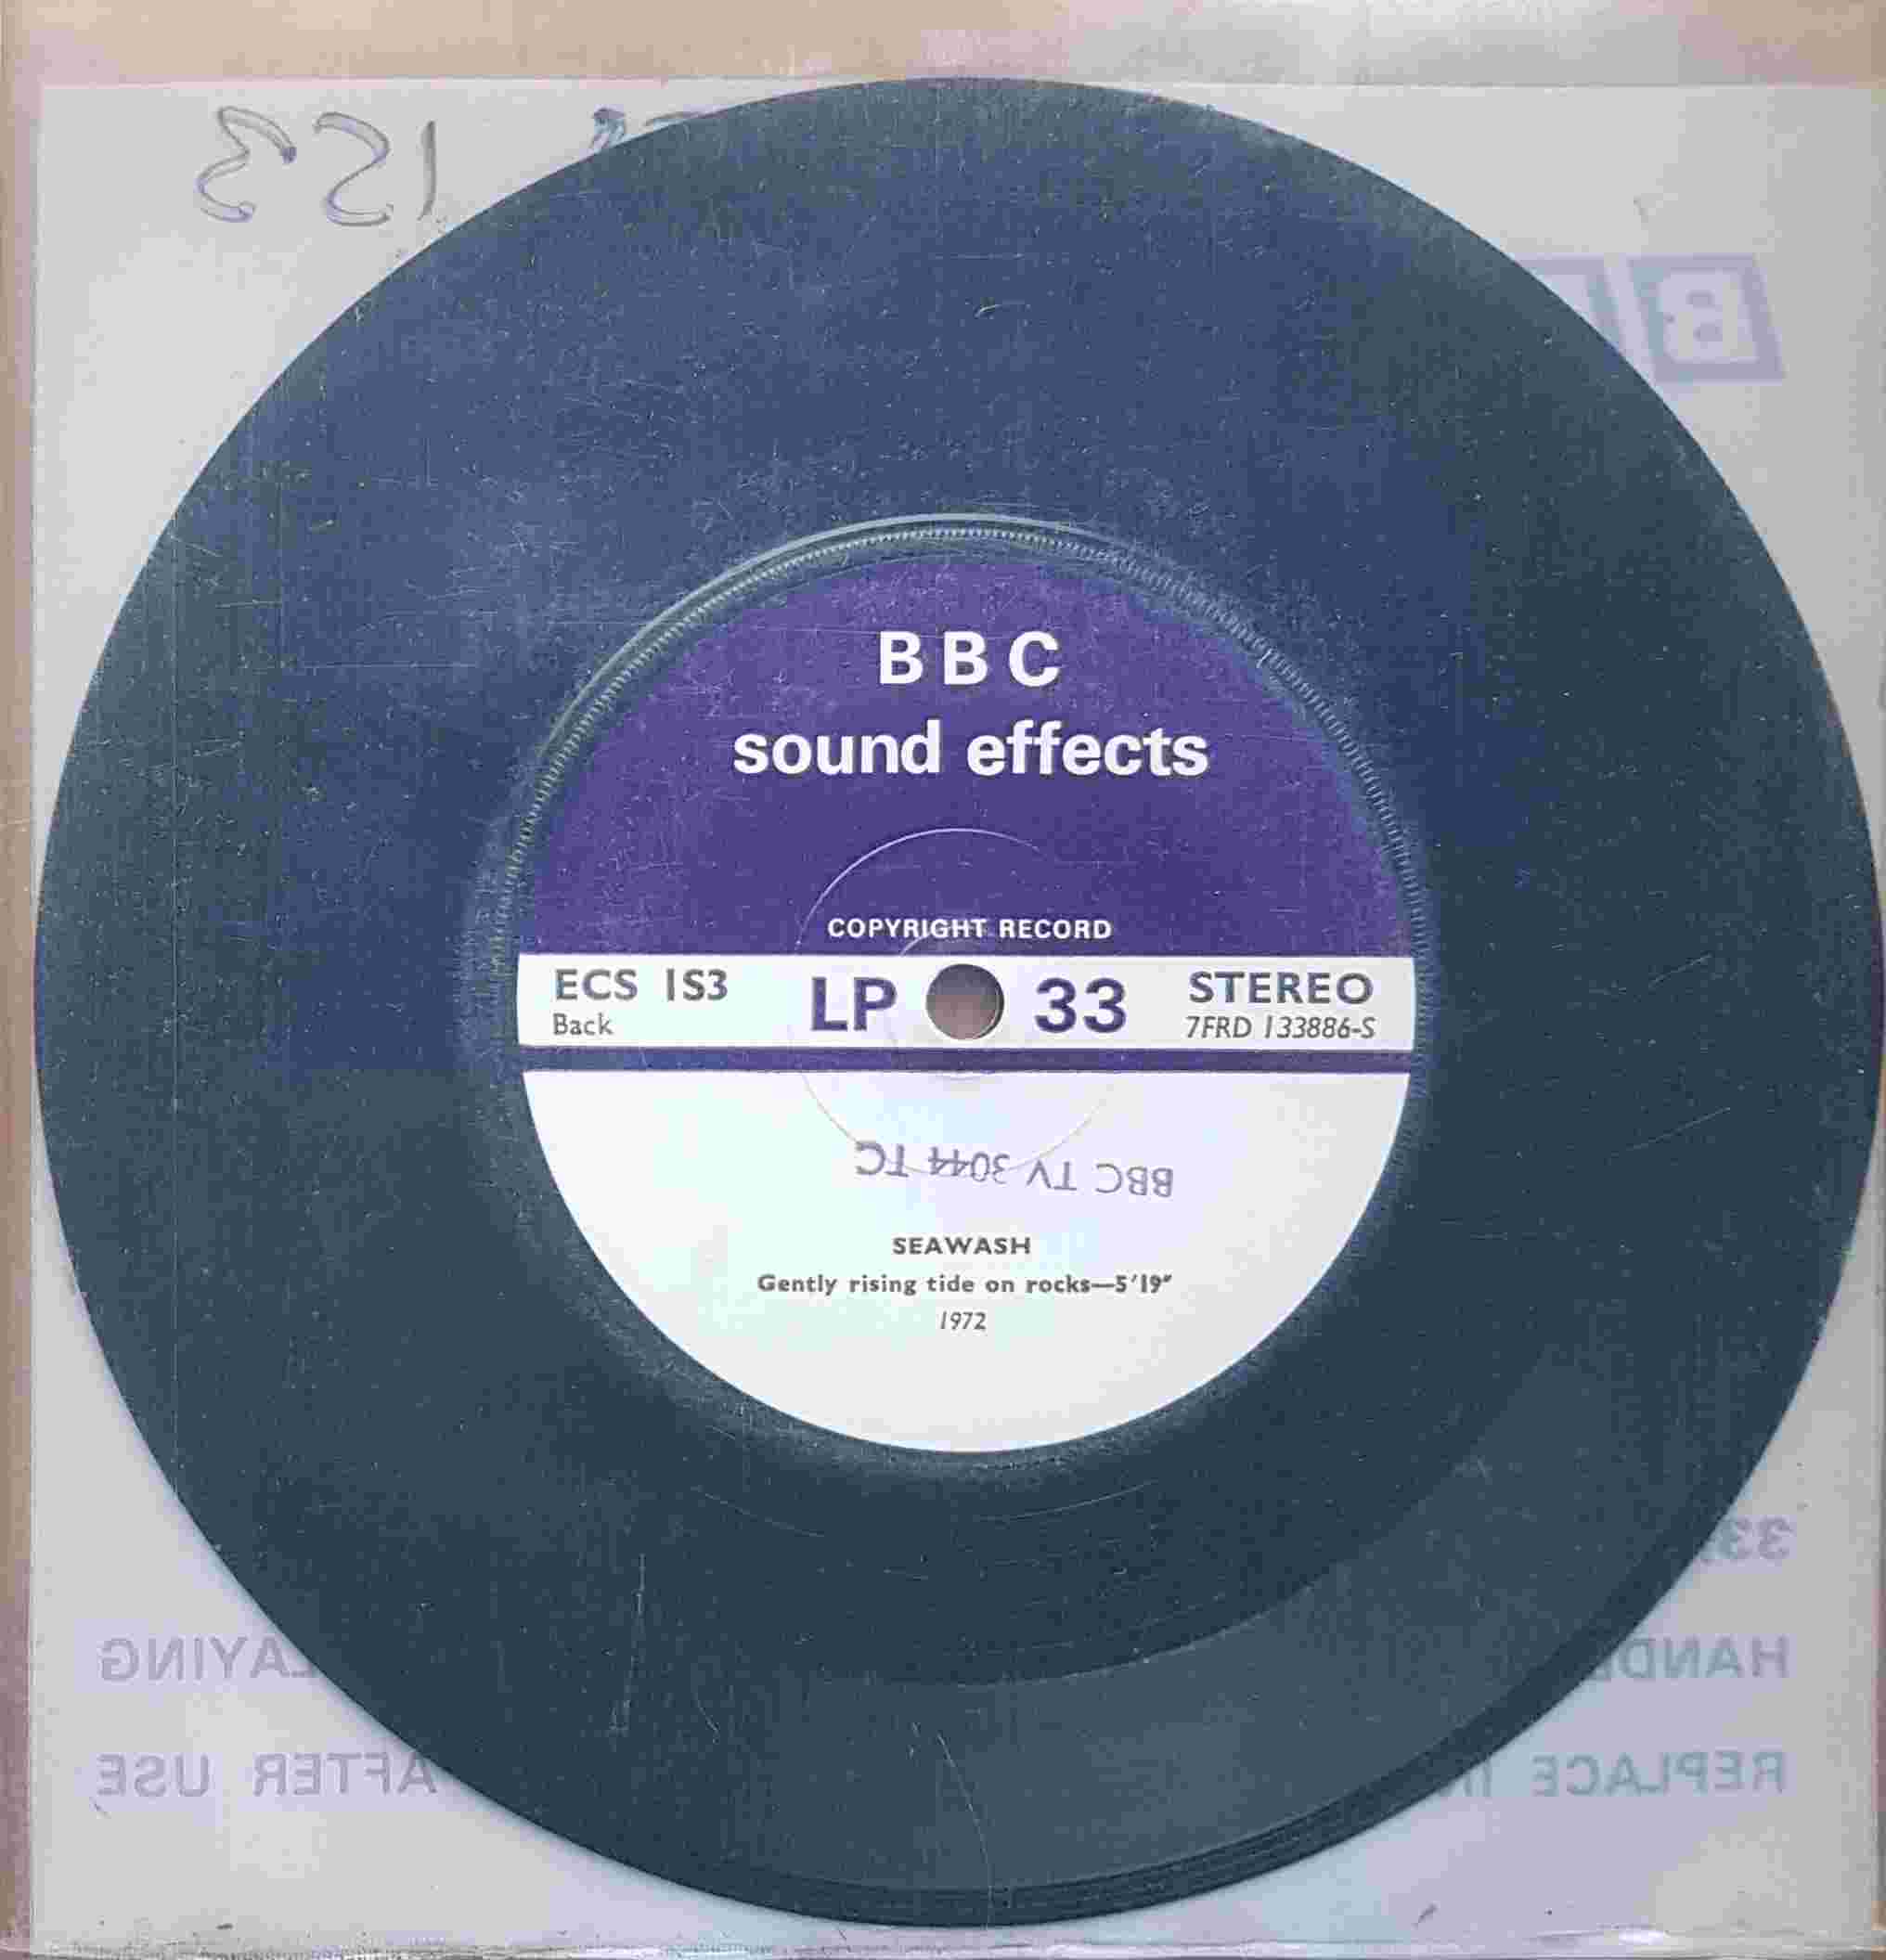 Picture of ECS 1S3 Seawash by artist Not registered from the BBC records and Tapes library